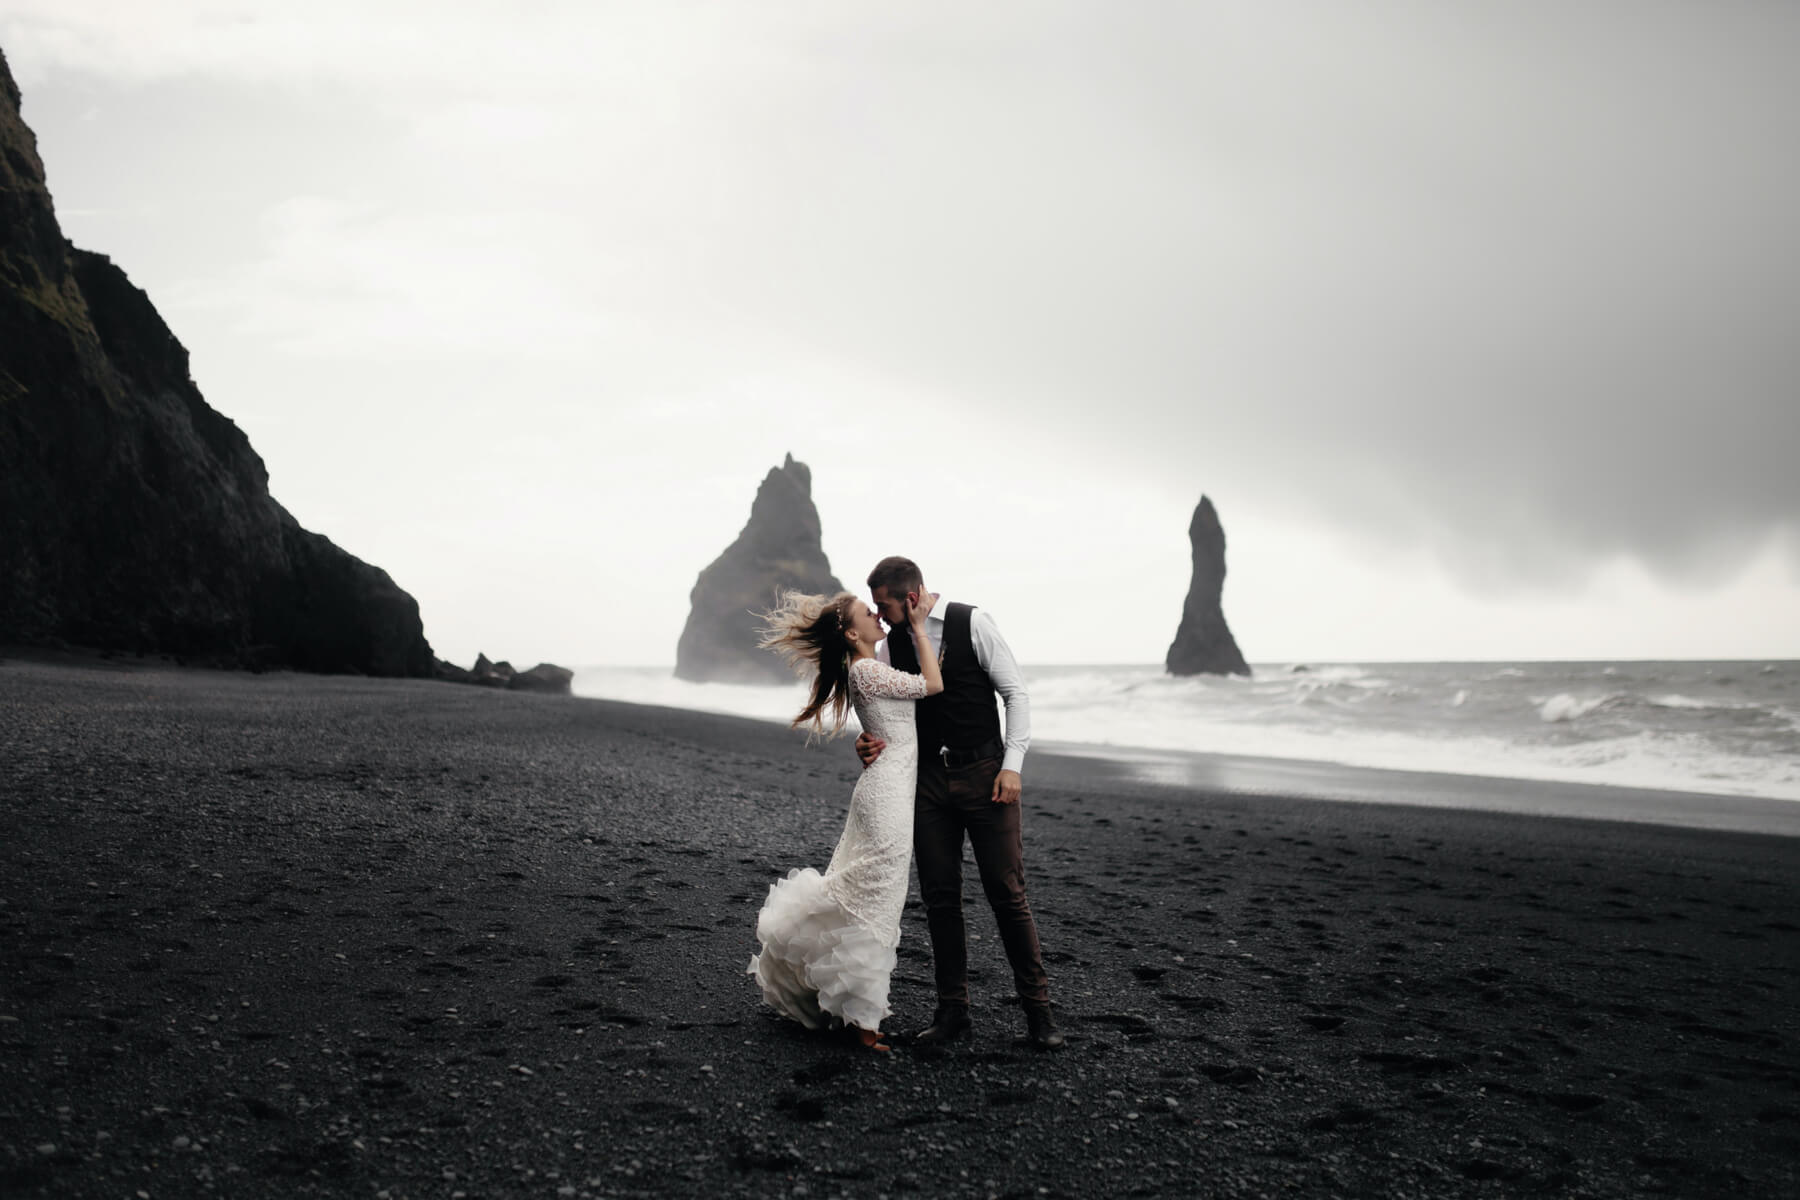 Photo of a bride and groom embracing on the beach.